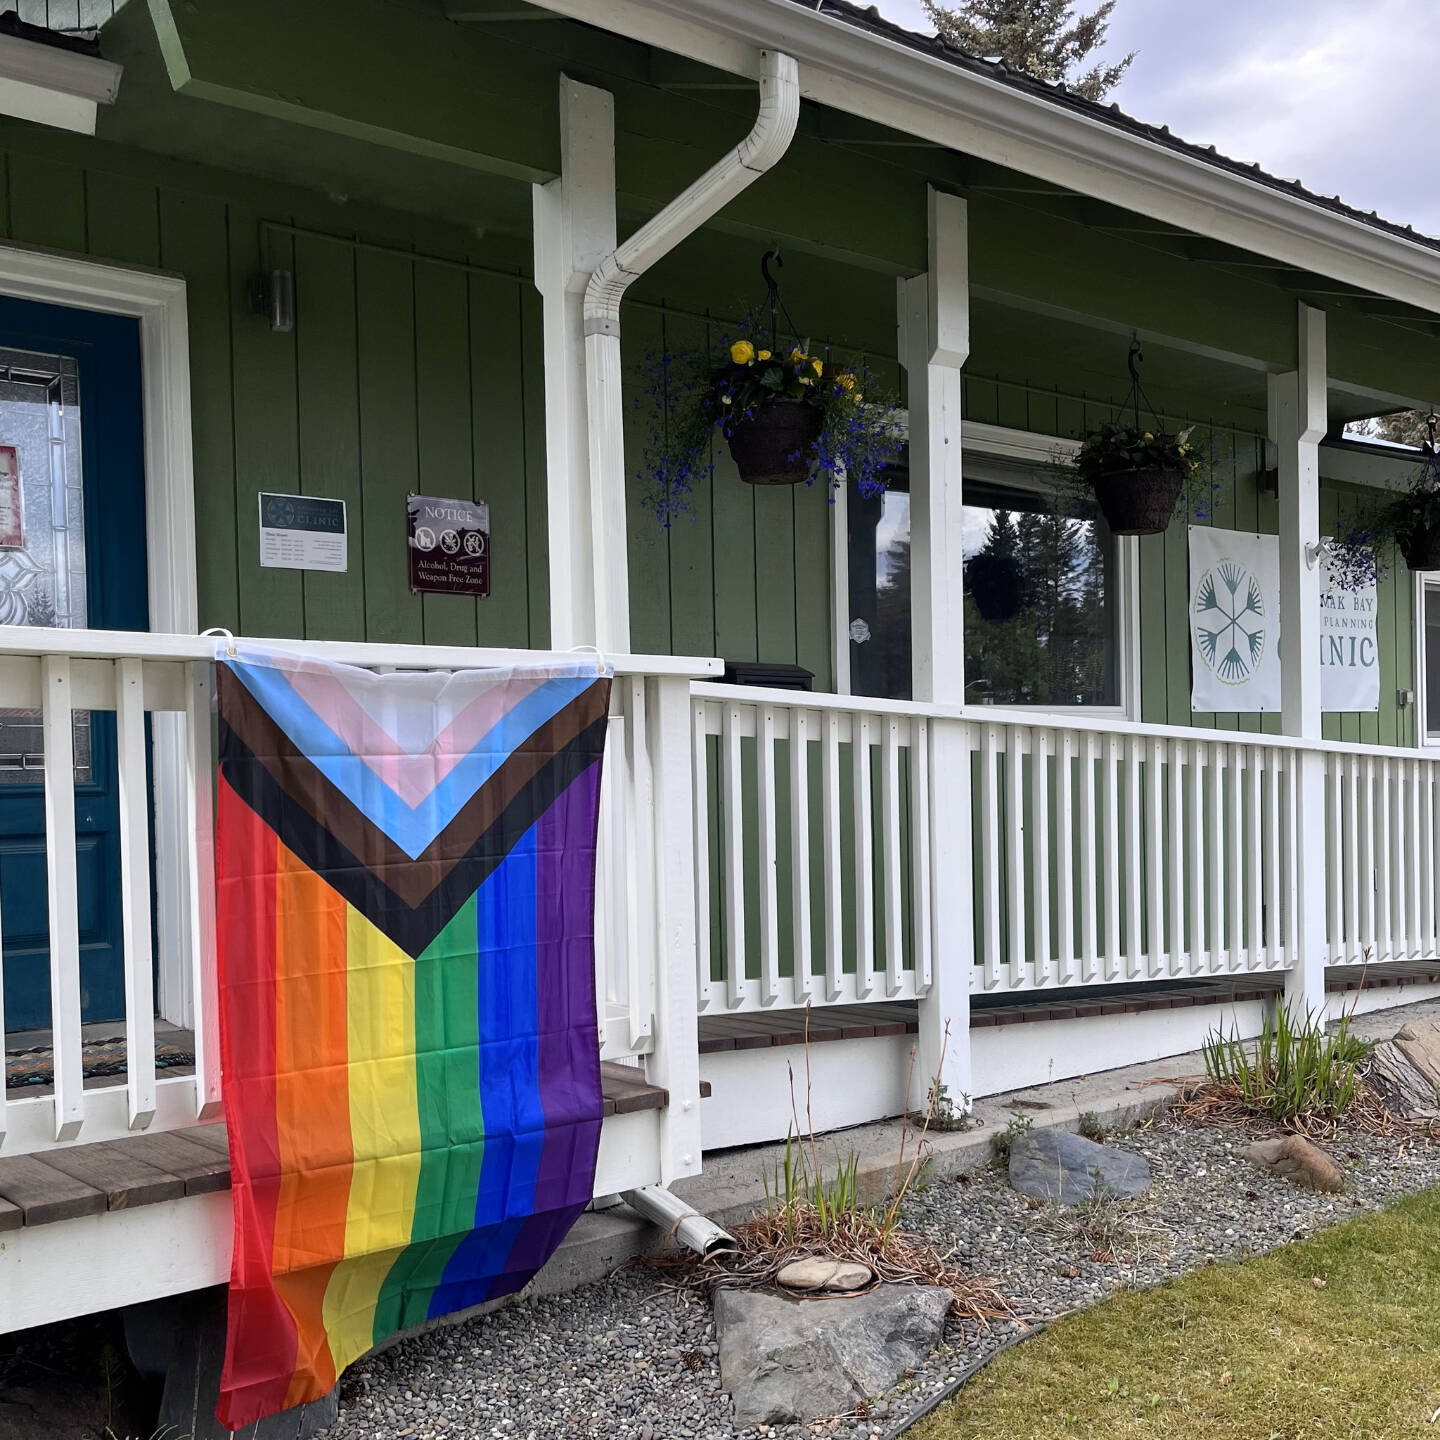 The newly-replaced Pride flag hangs in front of the Kachemak Bay Family Planning Clinic entrance in June 2023 in Homer, Alaska. Photo by the REC Room